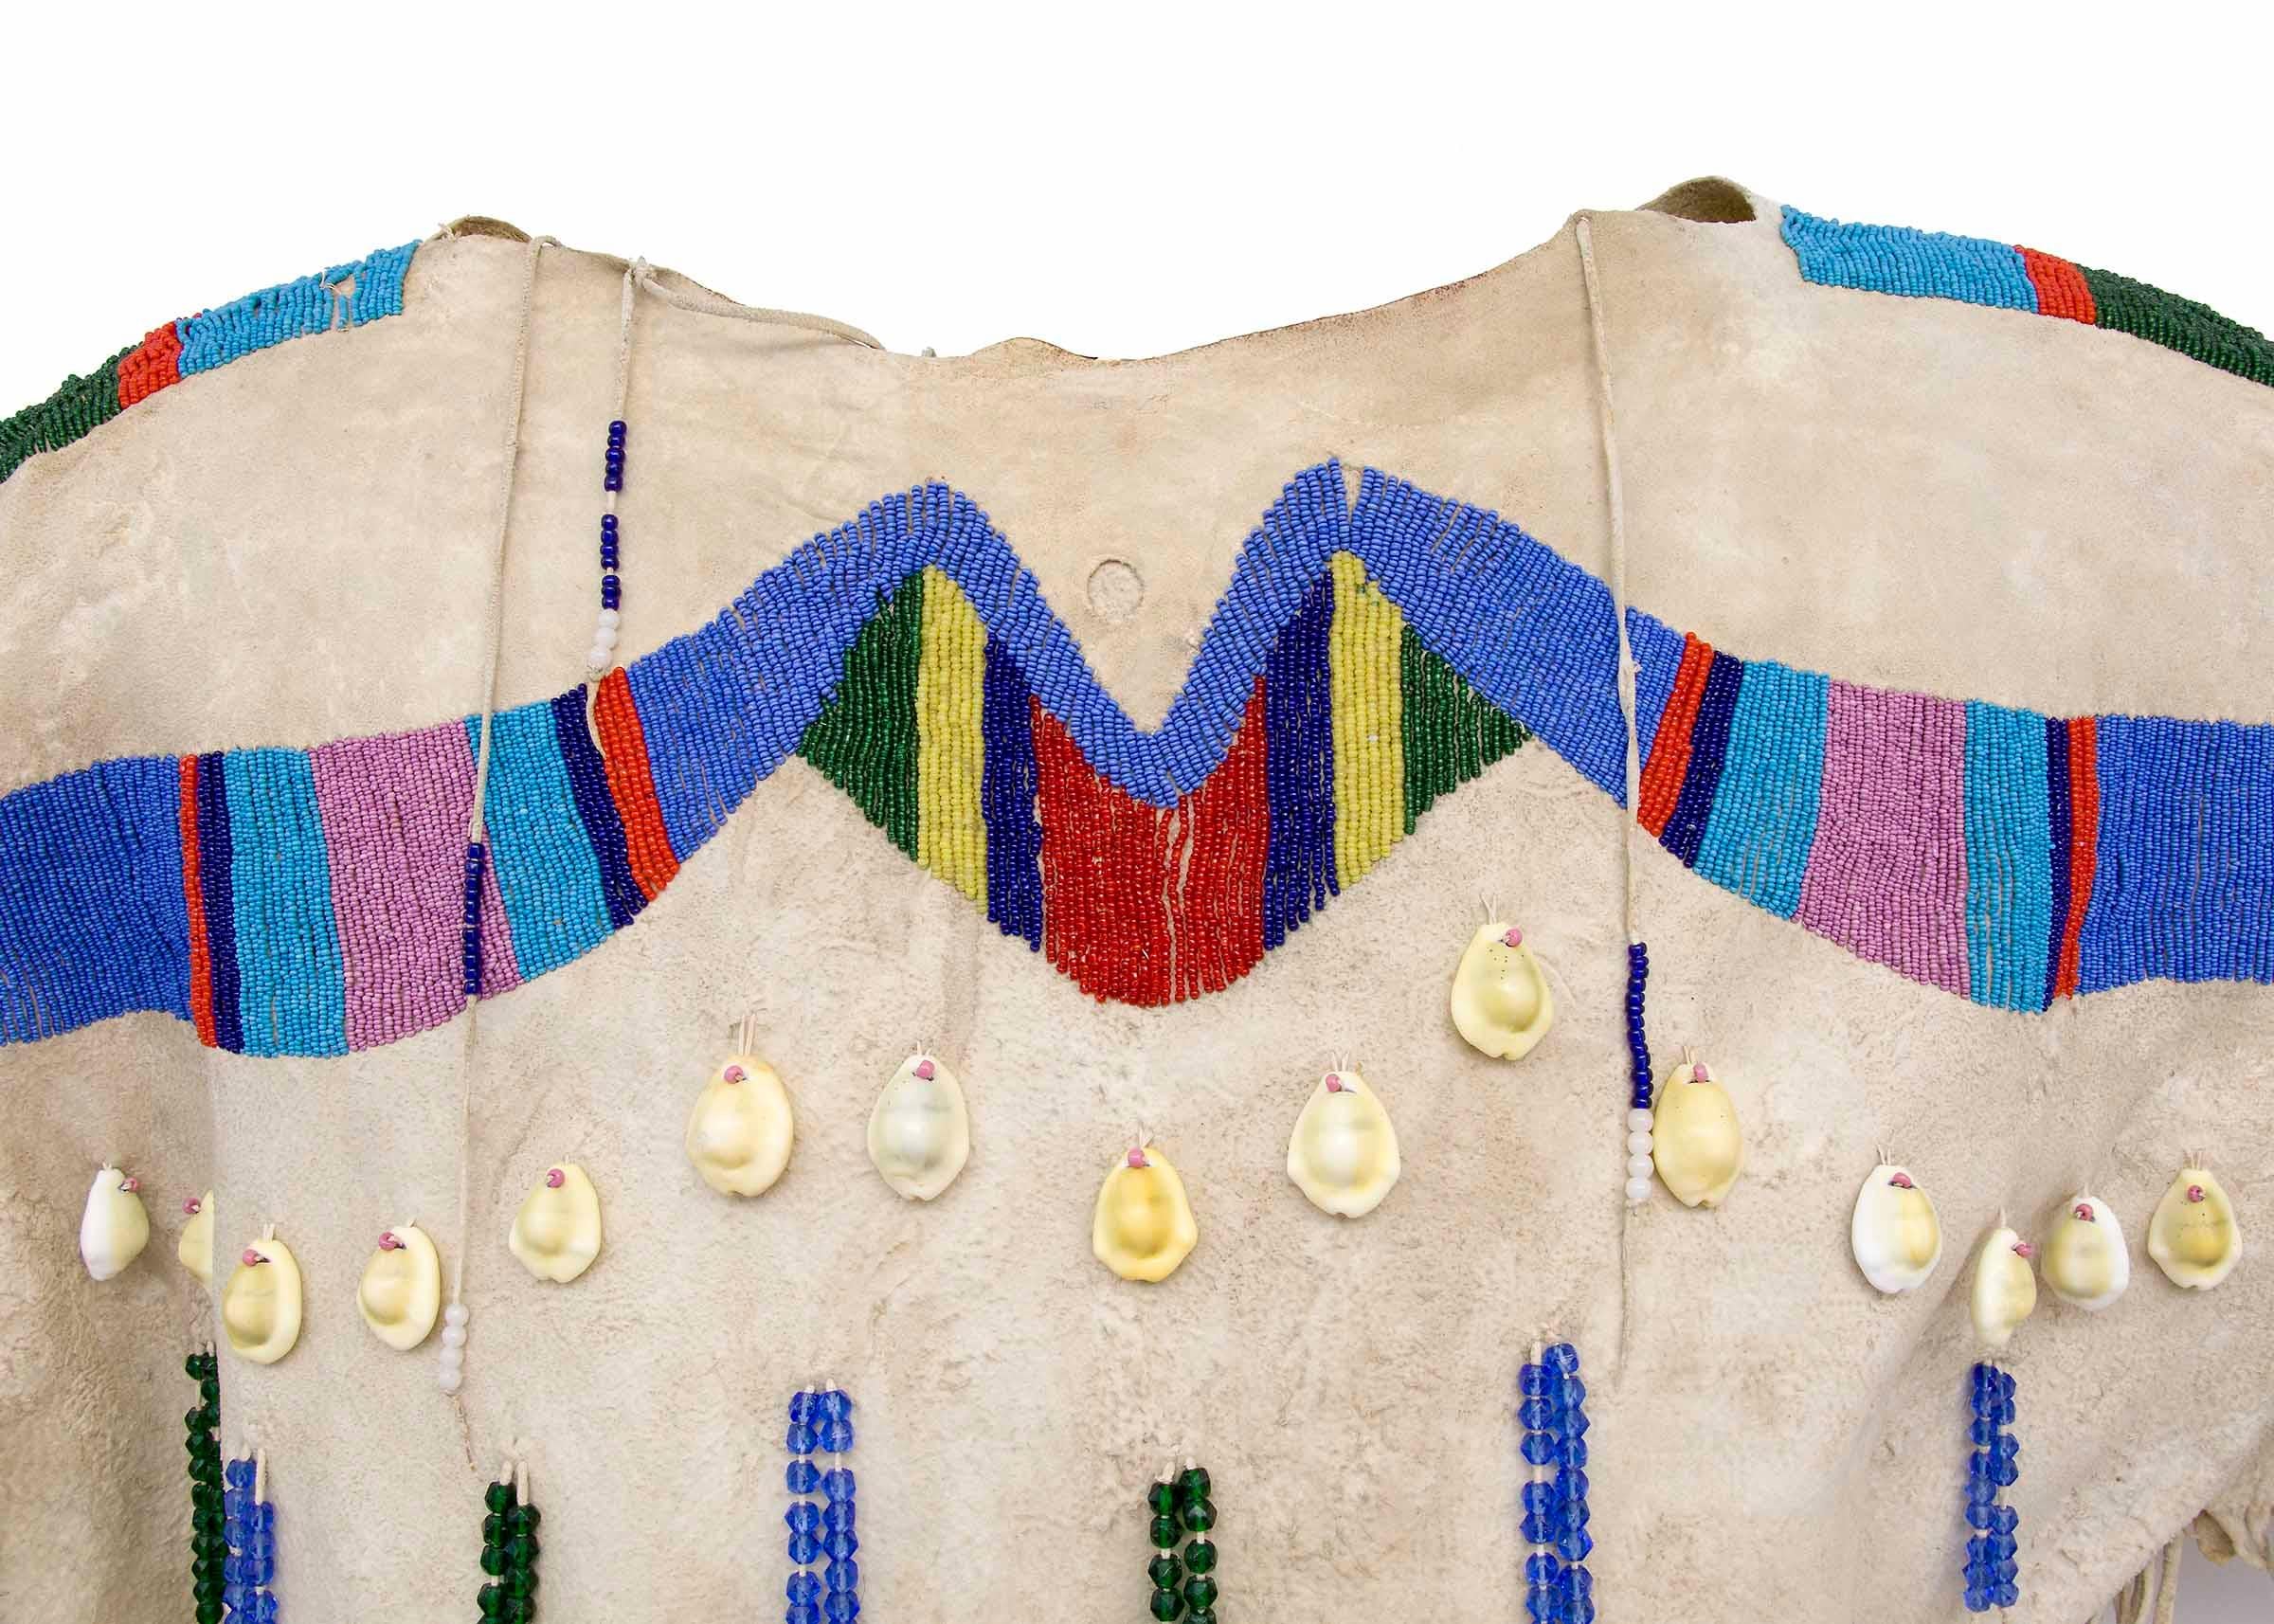 Antique beaded hide dress, Yakima, Plateau Region, Native American Indian, late 19th century, circa 1890. Traditional native-tanned hide dress is beaded across the top (yoke) in dark blue, red, green, cobalt blue, yellow, pink and Pony Trader blue